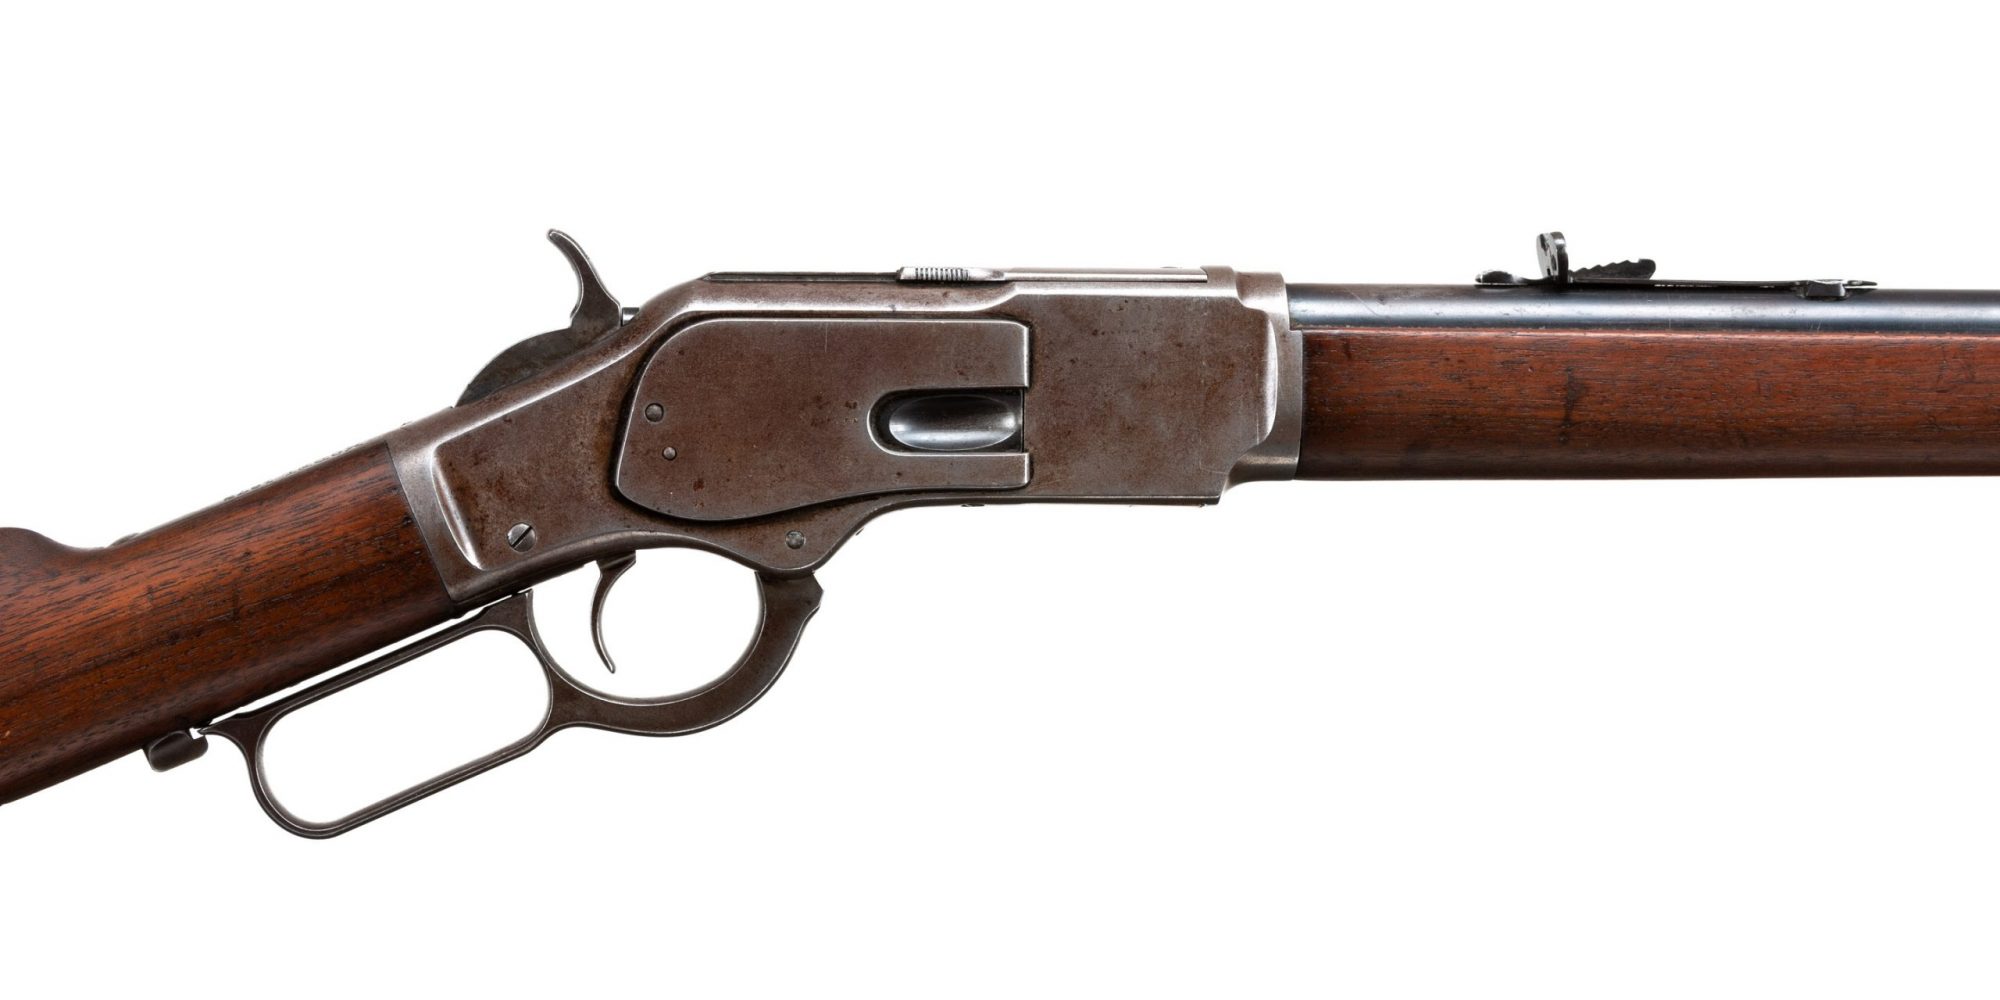 Photo of a pre-owned Winchester Model 1873, for sale through Turnbull Restoration